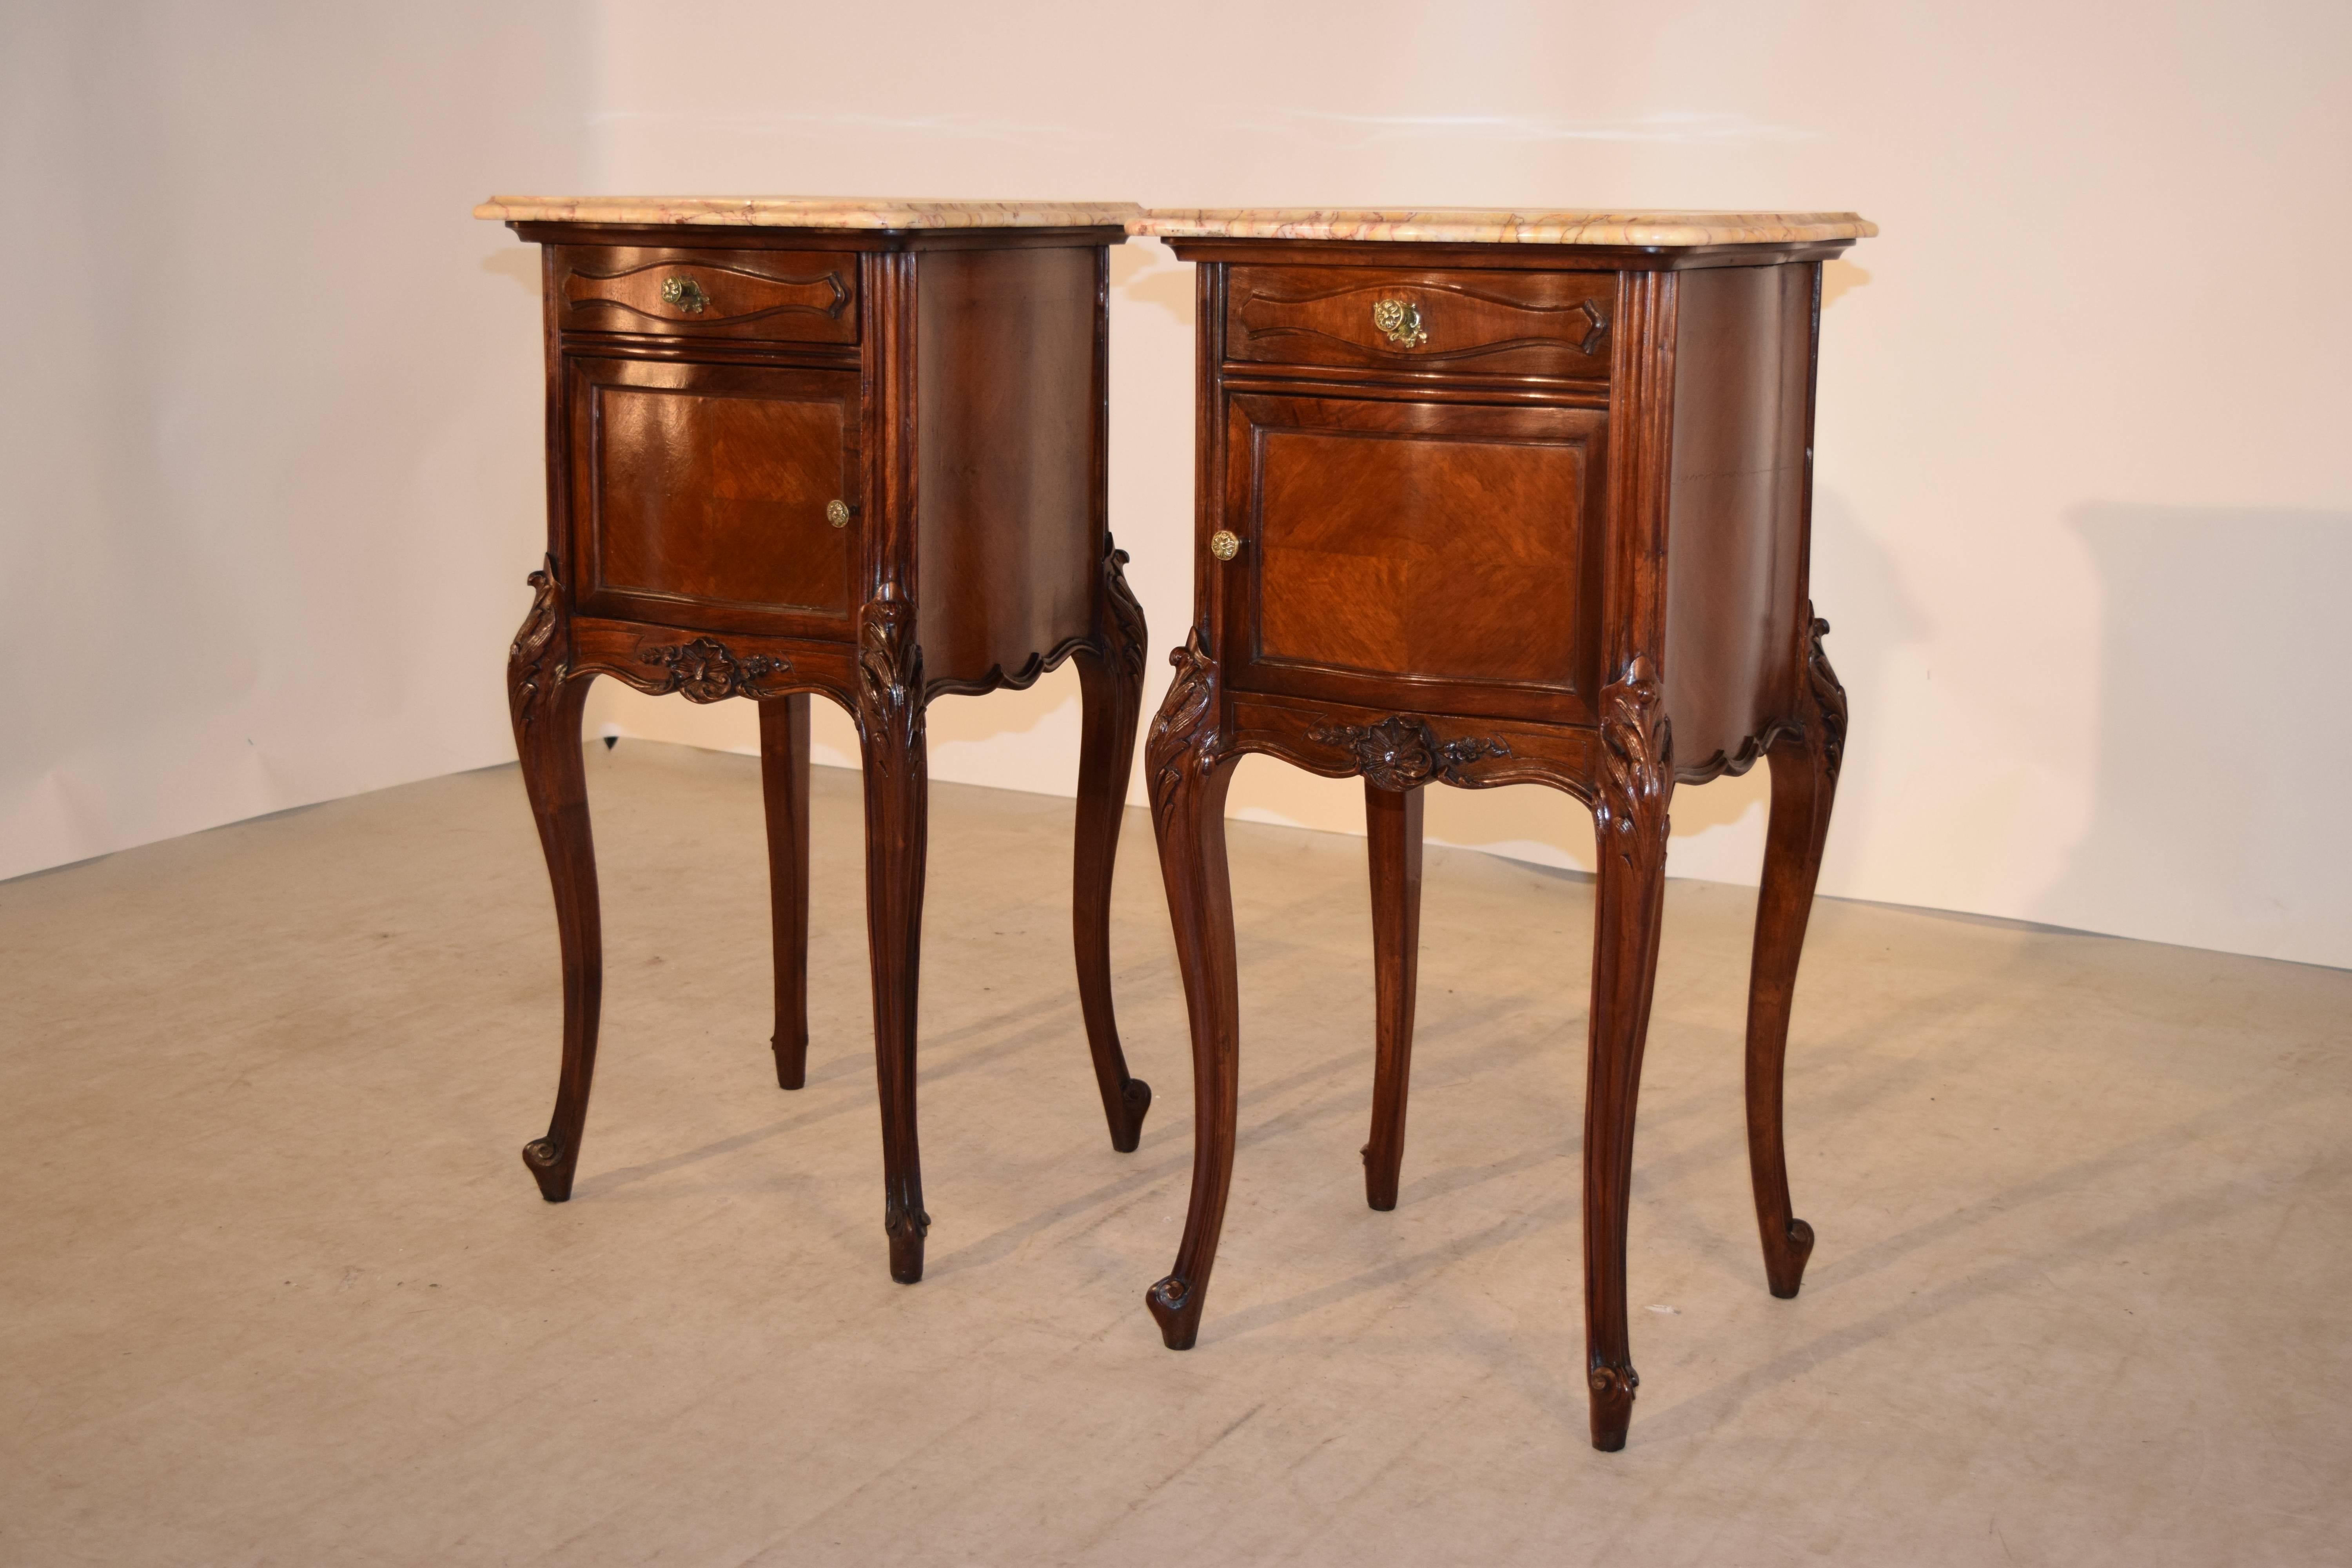 19th Century pair of bedside tables from France.  The tops are removable and are made of lovely grained marble with rich tones of reds and tans, following down to serpentine shaped cases made of mahogany, raised on hand carved cabriole legs, ending